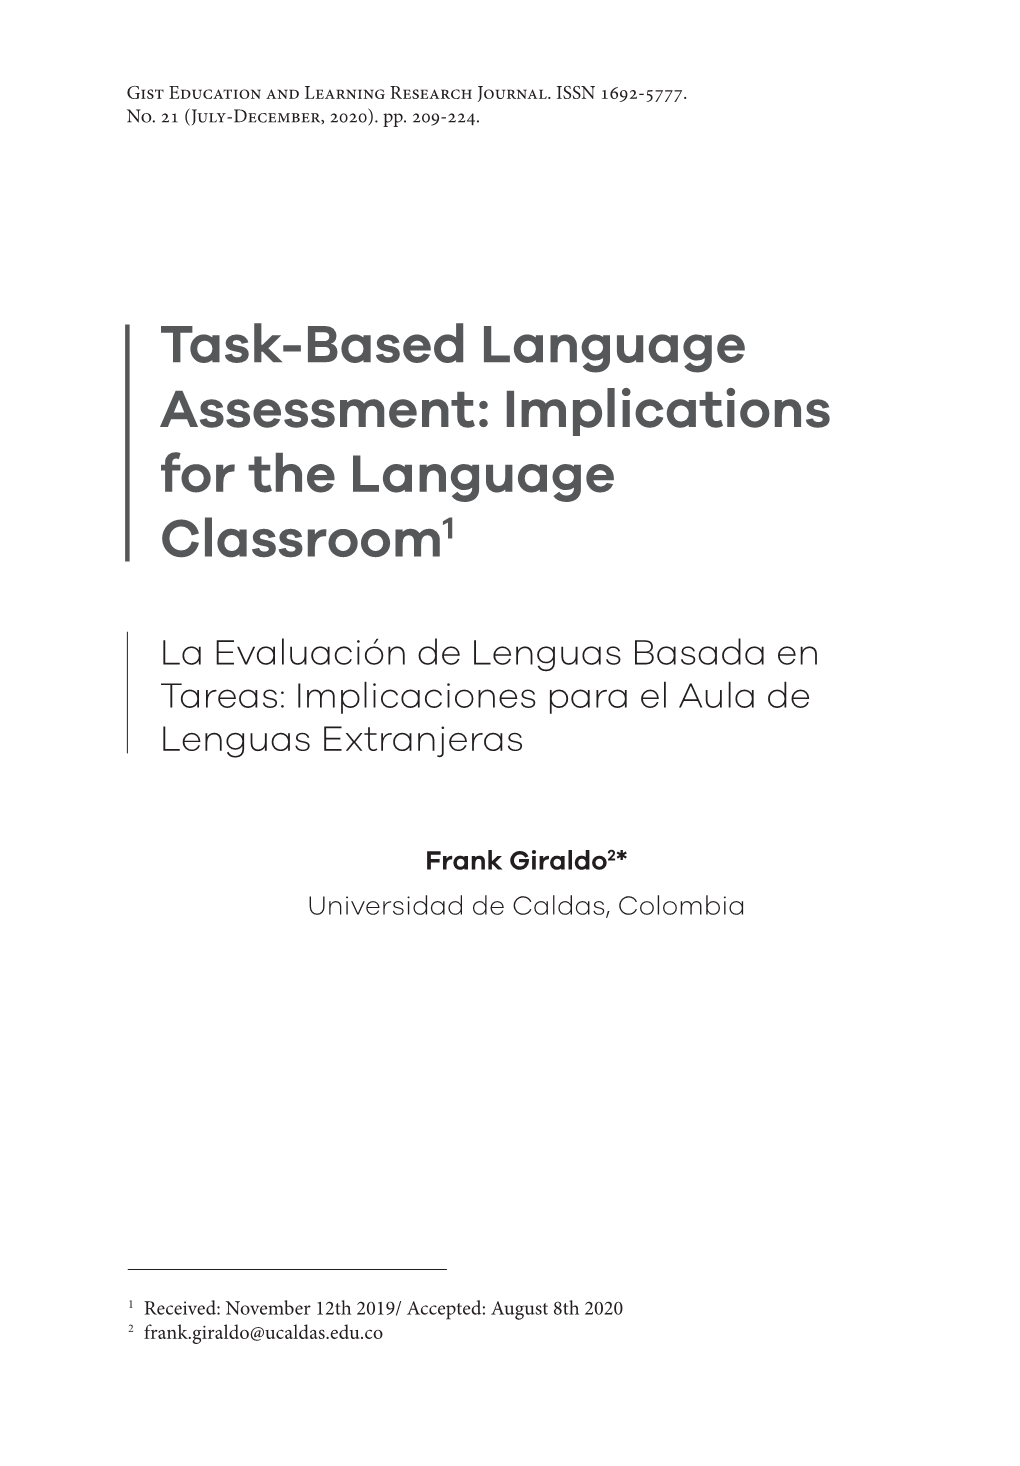 Task-Based Language Assessment: Implications for the Language Classroom1